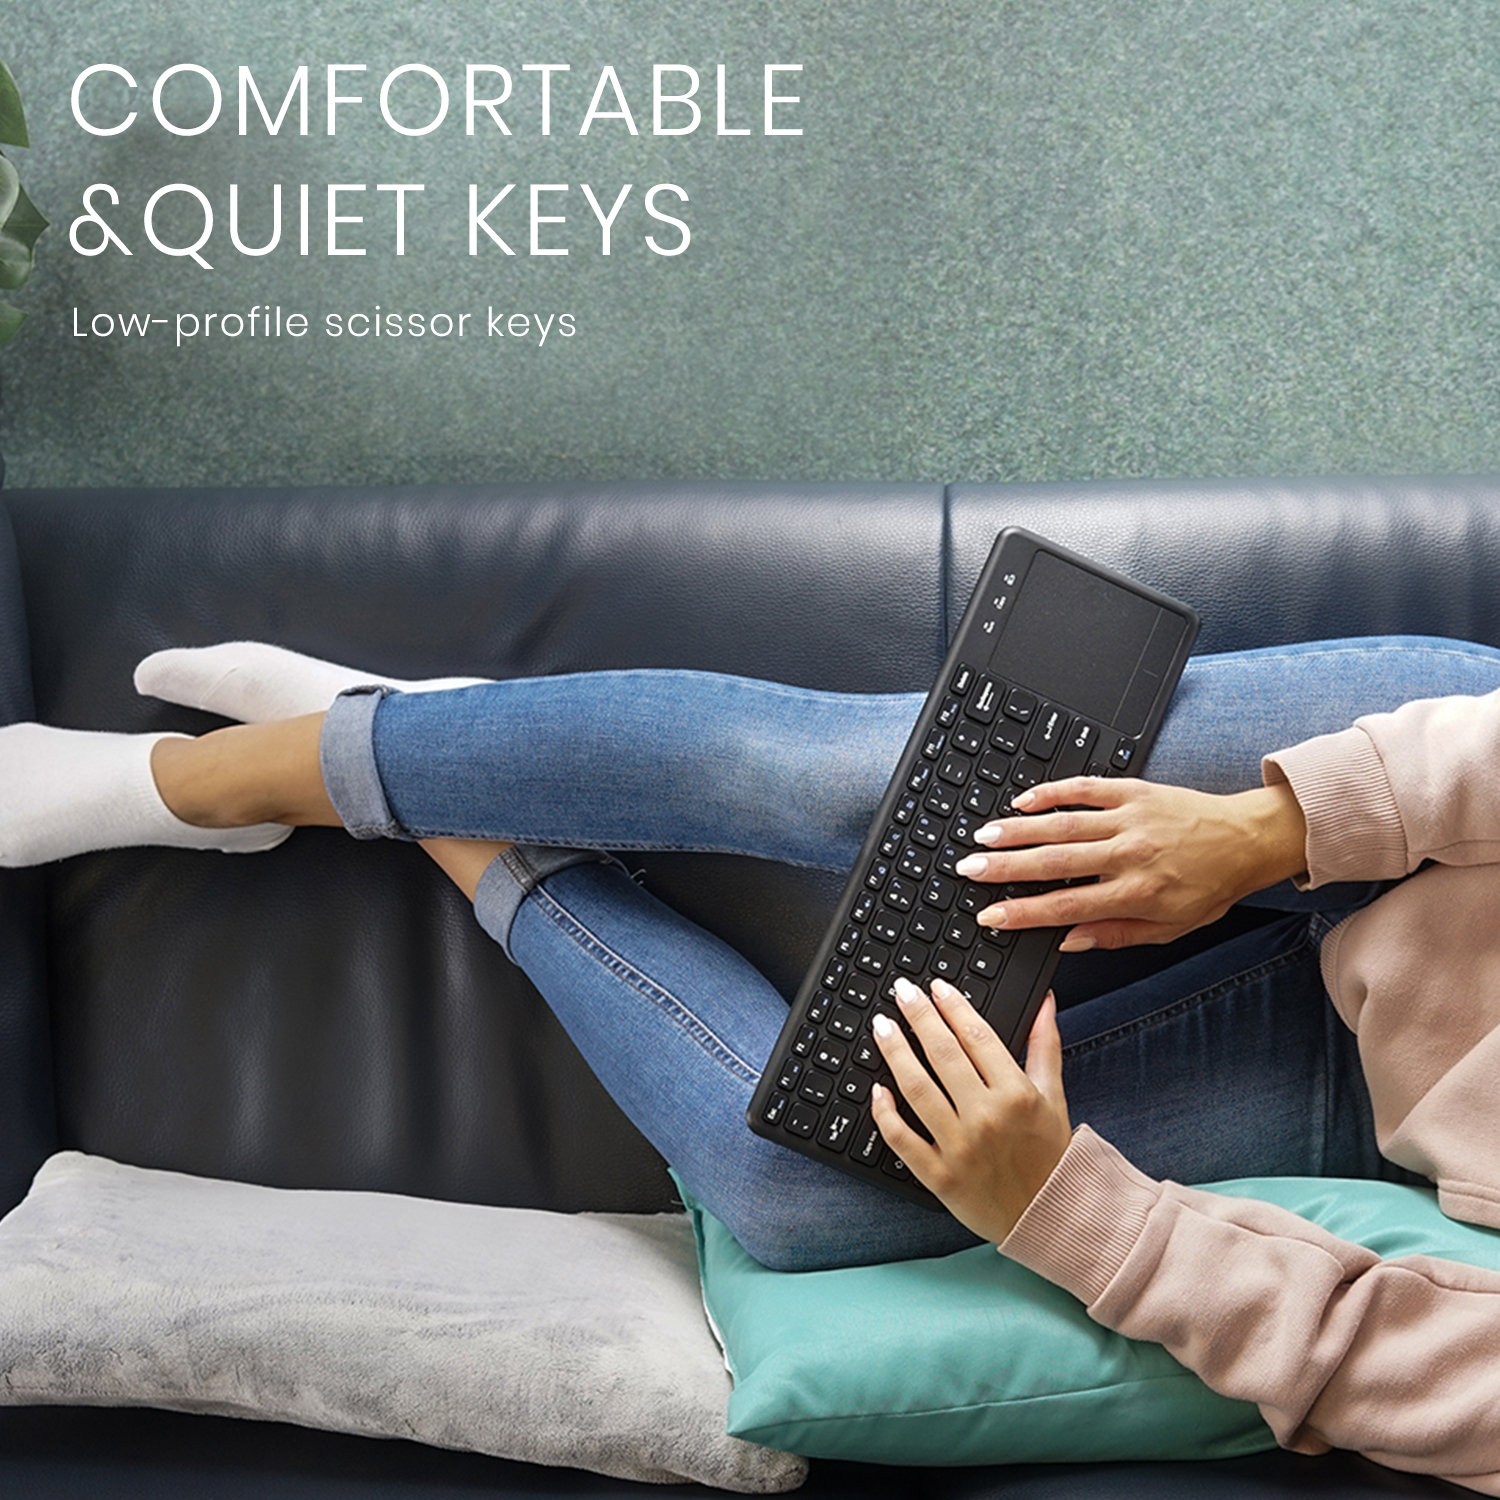 COMFORTABLE AND QUIET KEYS